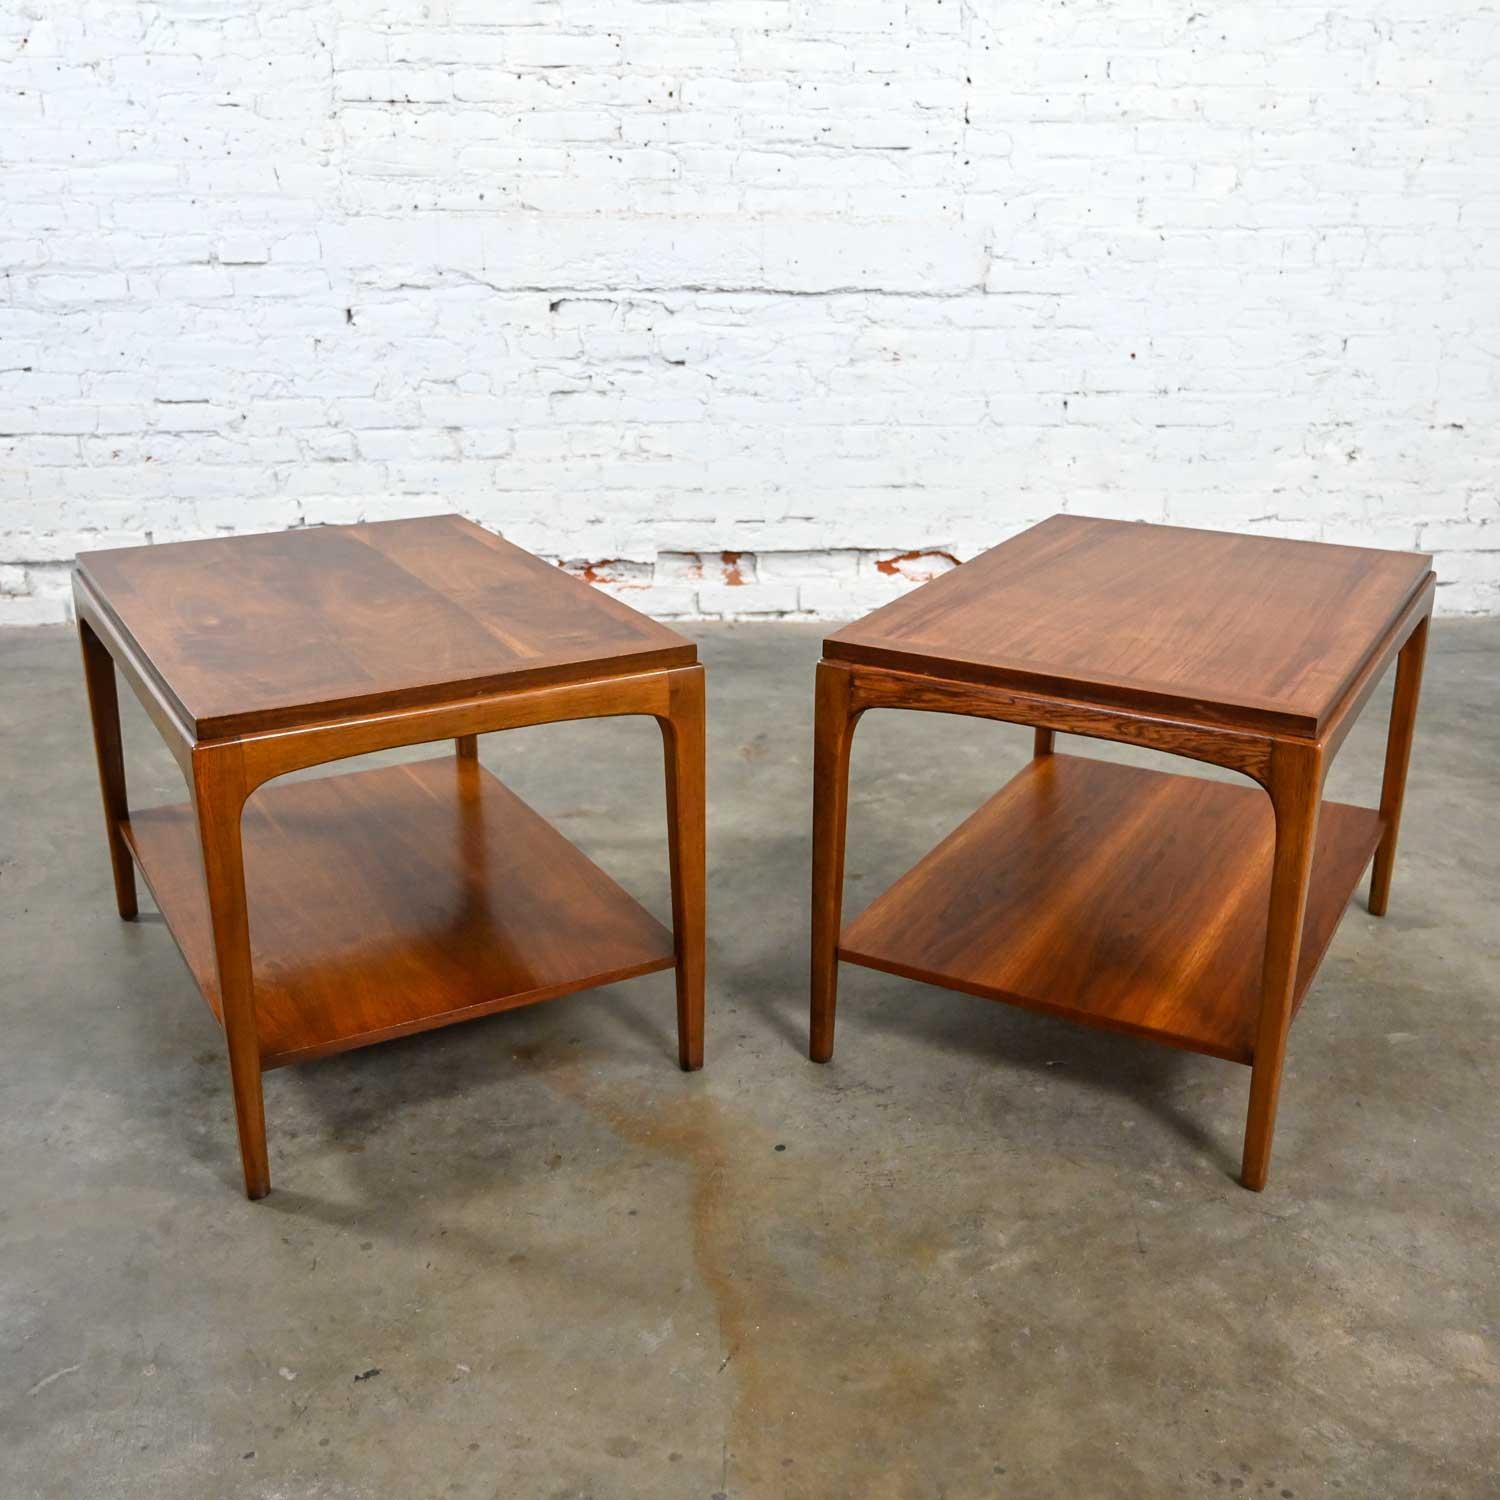 Lovely pair of Lane Rhythm Collection Mid-Century Modern walnut end tables with a lower shelf. Beautiful condition, keeping in mind that these are vintage and not new so will have signs of use and wear. The tops have been refinished and given a new